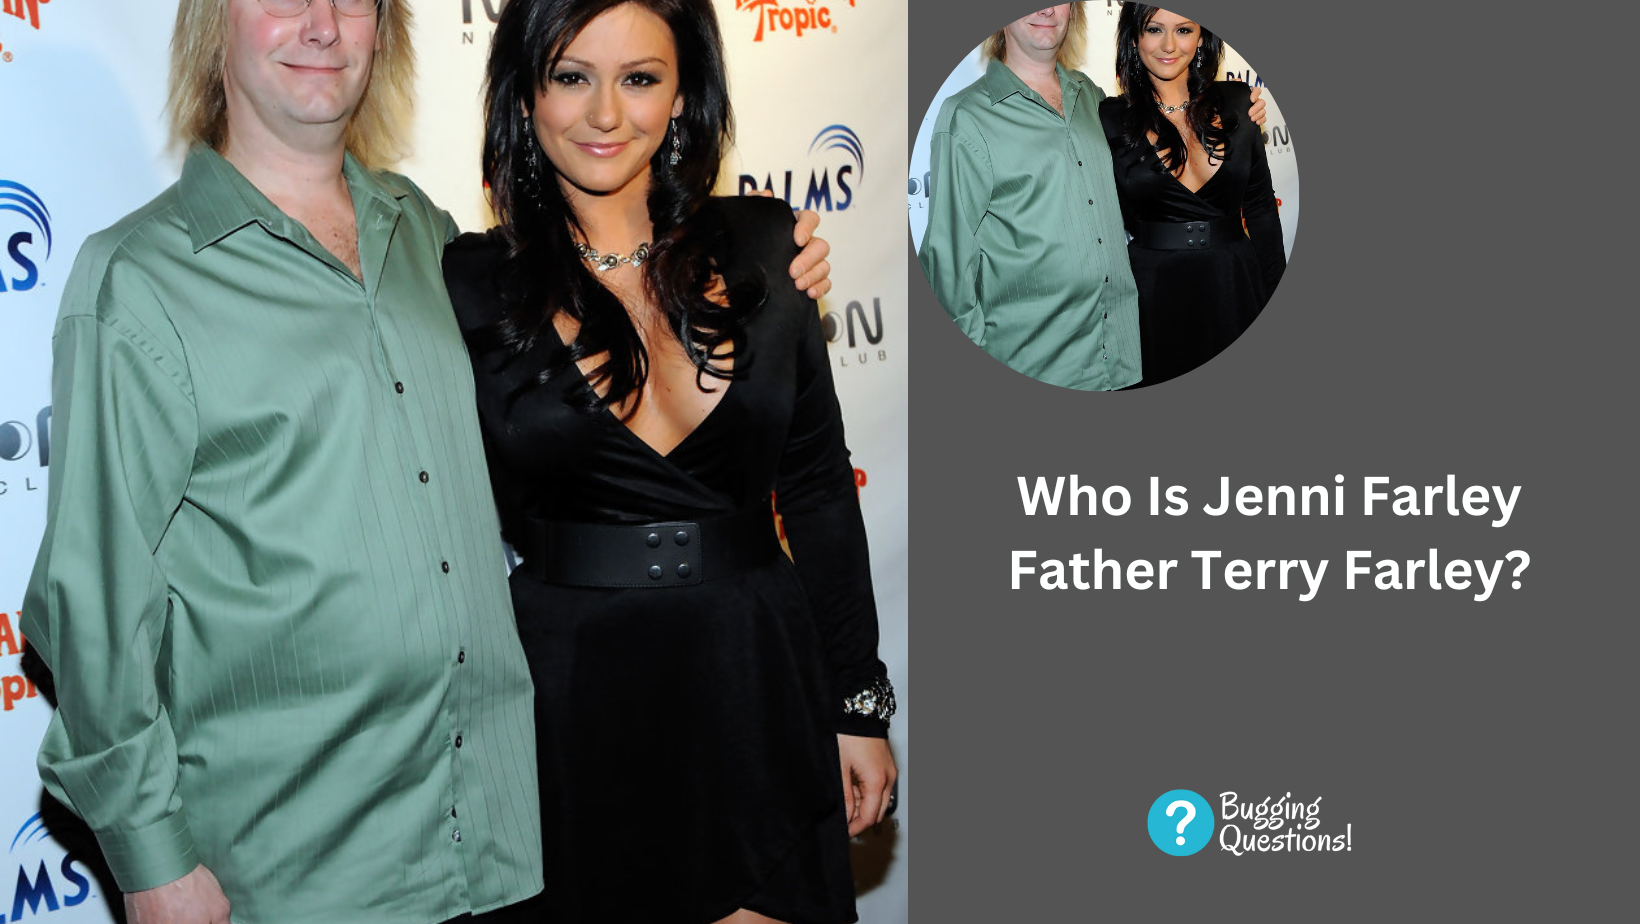 Who Is Jenni Farley Father Terry Farley?